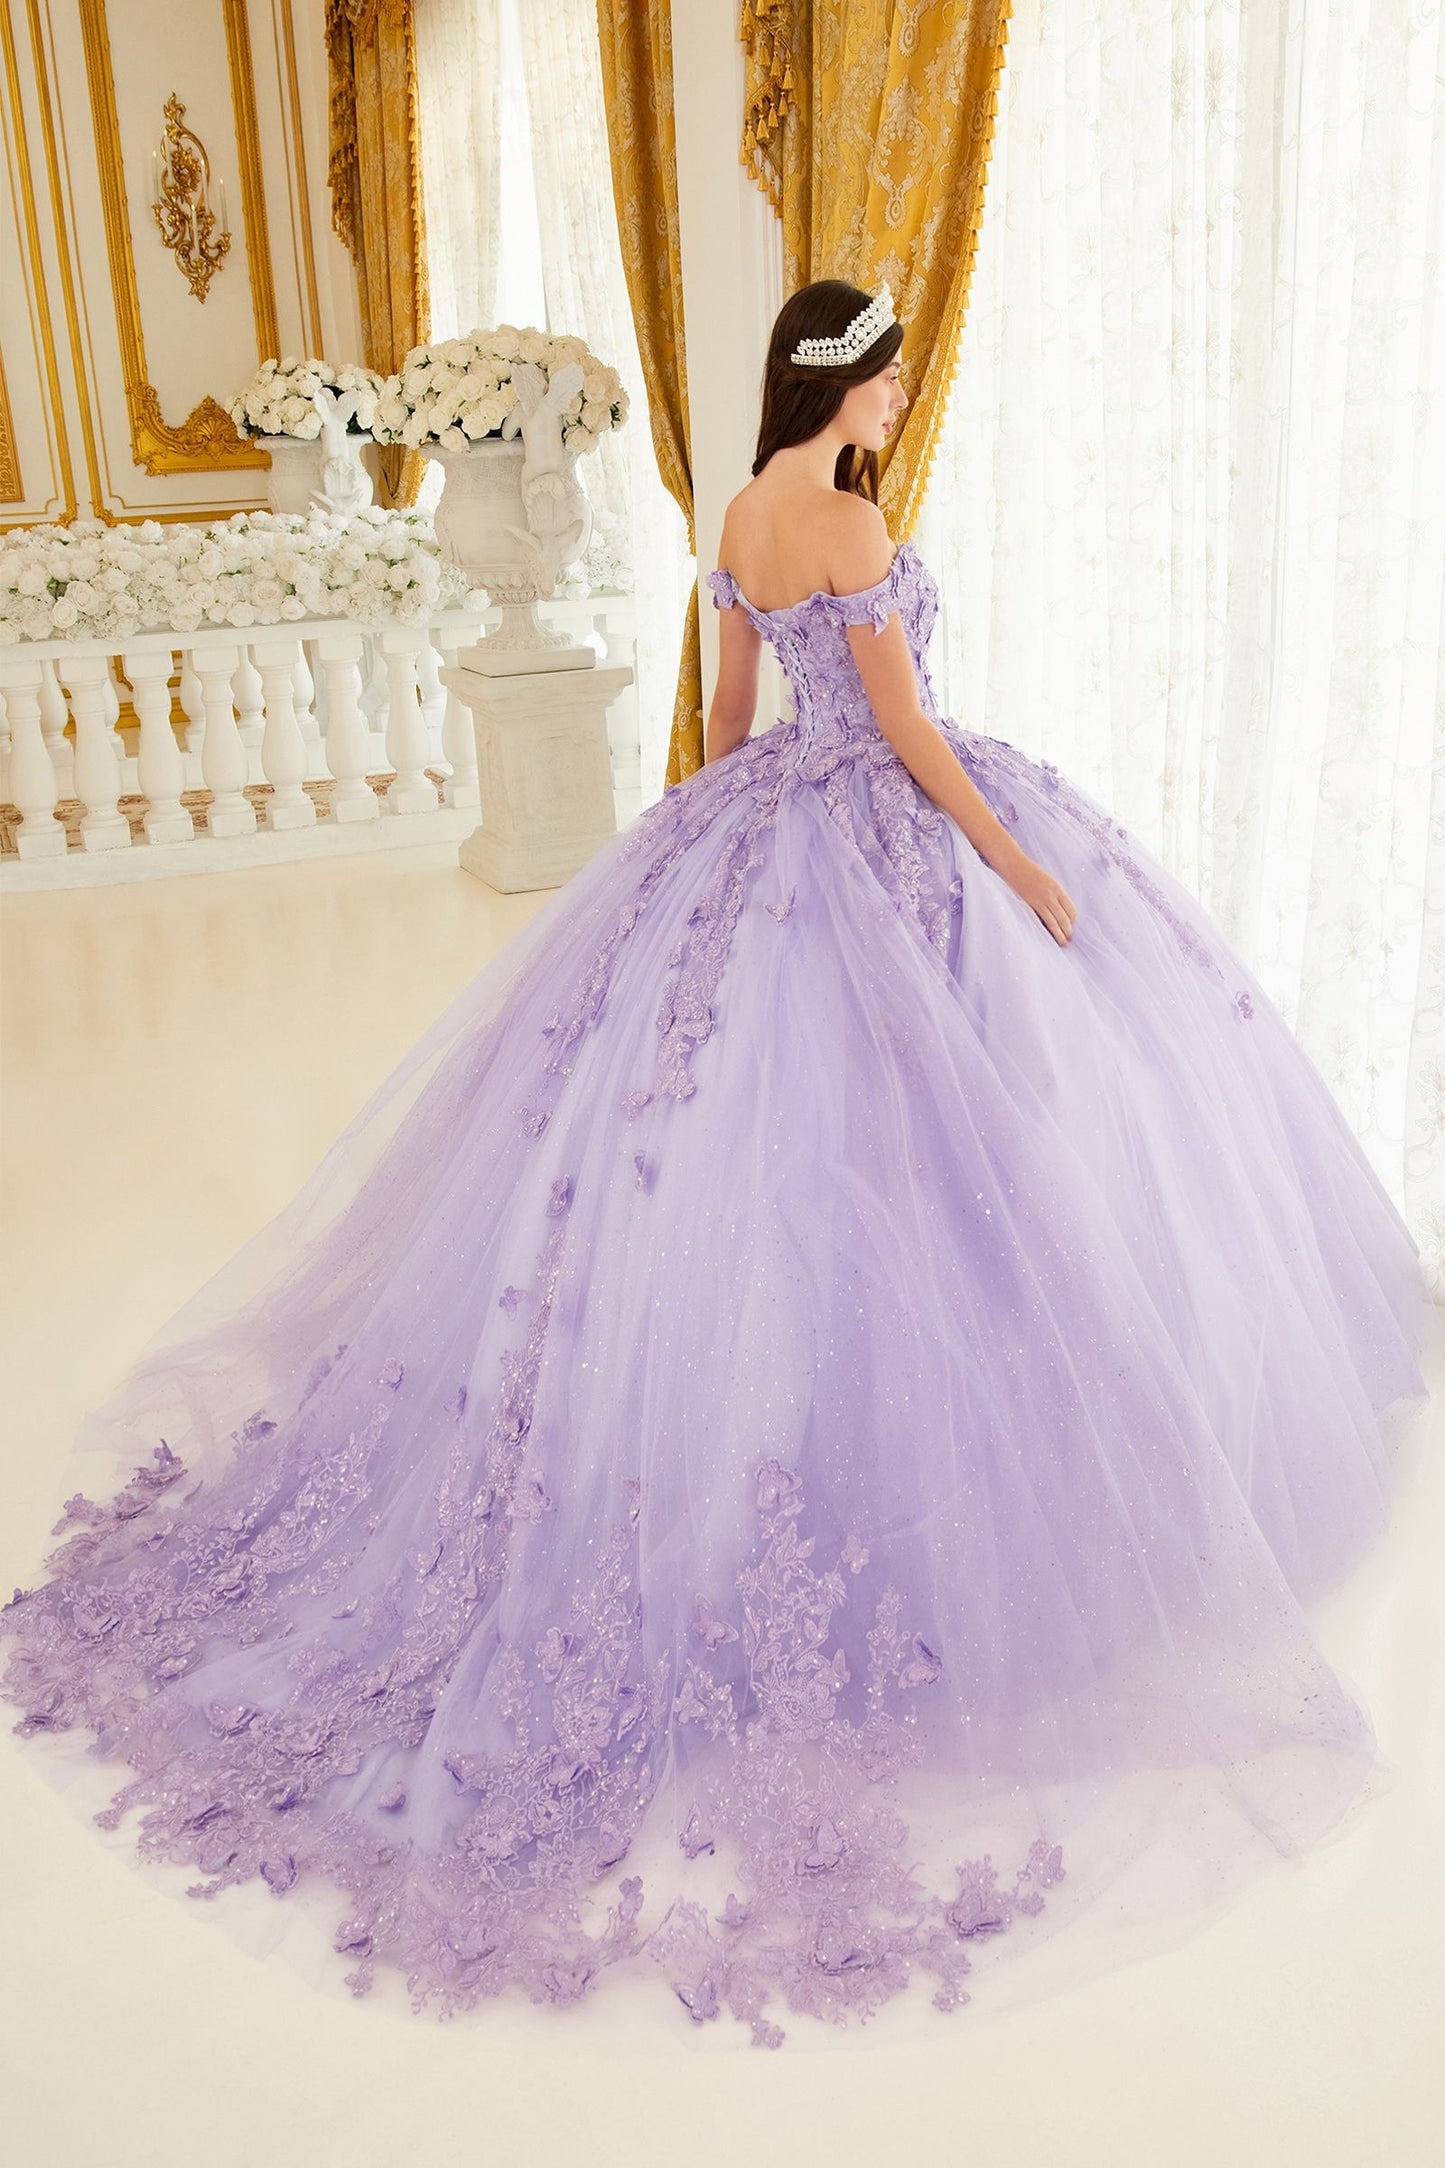 The Ladivine 15709 quinceanera dress will have you feeling like royalty! This stunning ballgown features a shimmery off-the-shoulder neckline with a corset lace-up and train - perfect for making a grand entrance! Now if just Cinderella could catch a break... Step into a dream wearing this beautiful off the shoulder butterfly ball gown! 